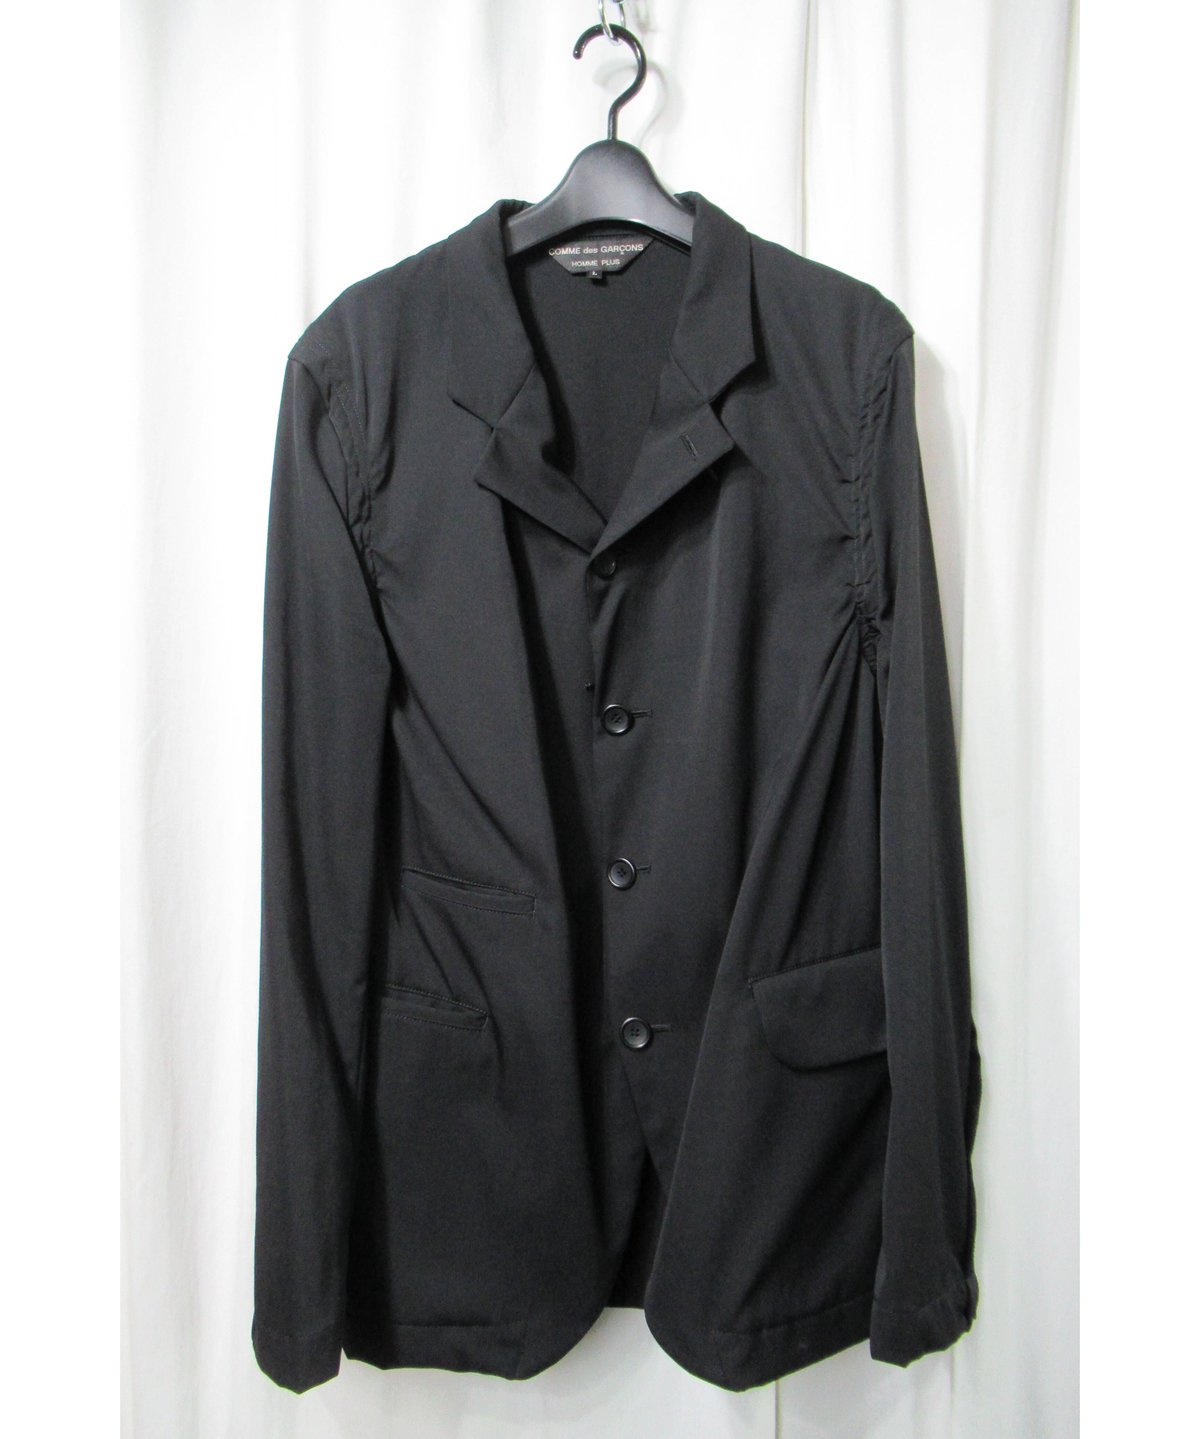 AD1998 COMME des GARCONS HOMME PLUS インサイドアウト デザ...